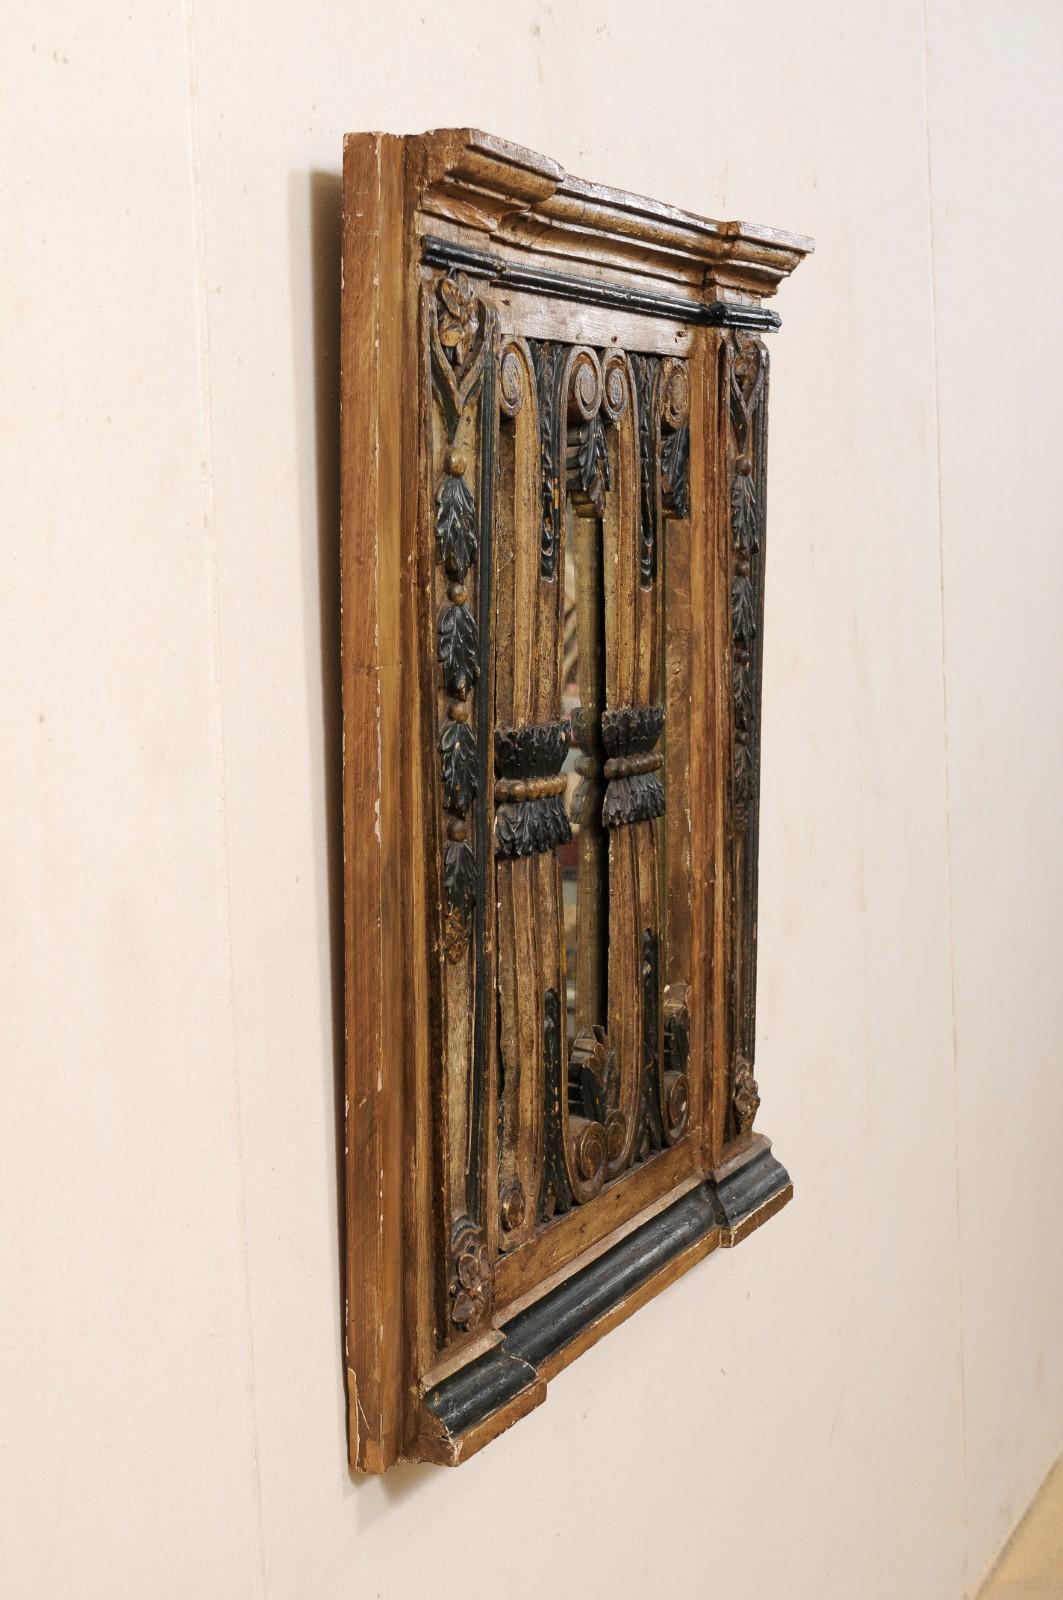 Early 19th Century Portuguese Carved Wood Gate with Mirror at Backside For Sale 4